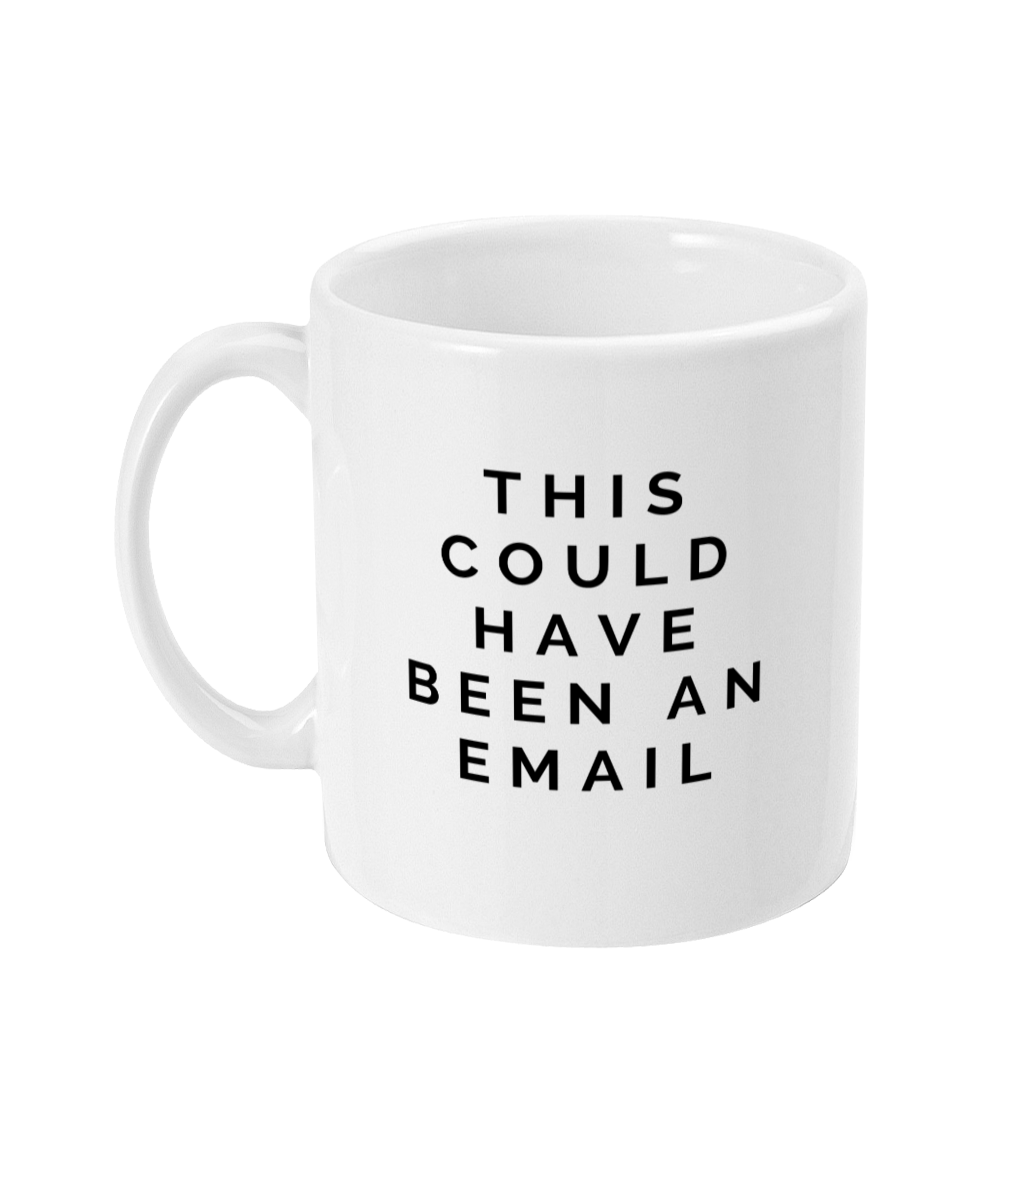 This could have been an email mug